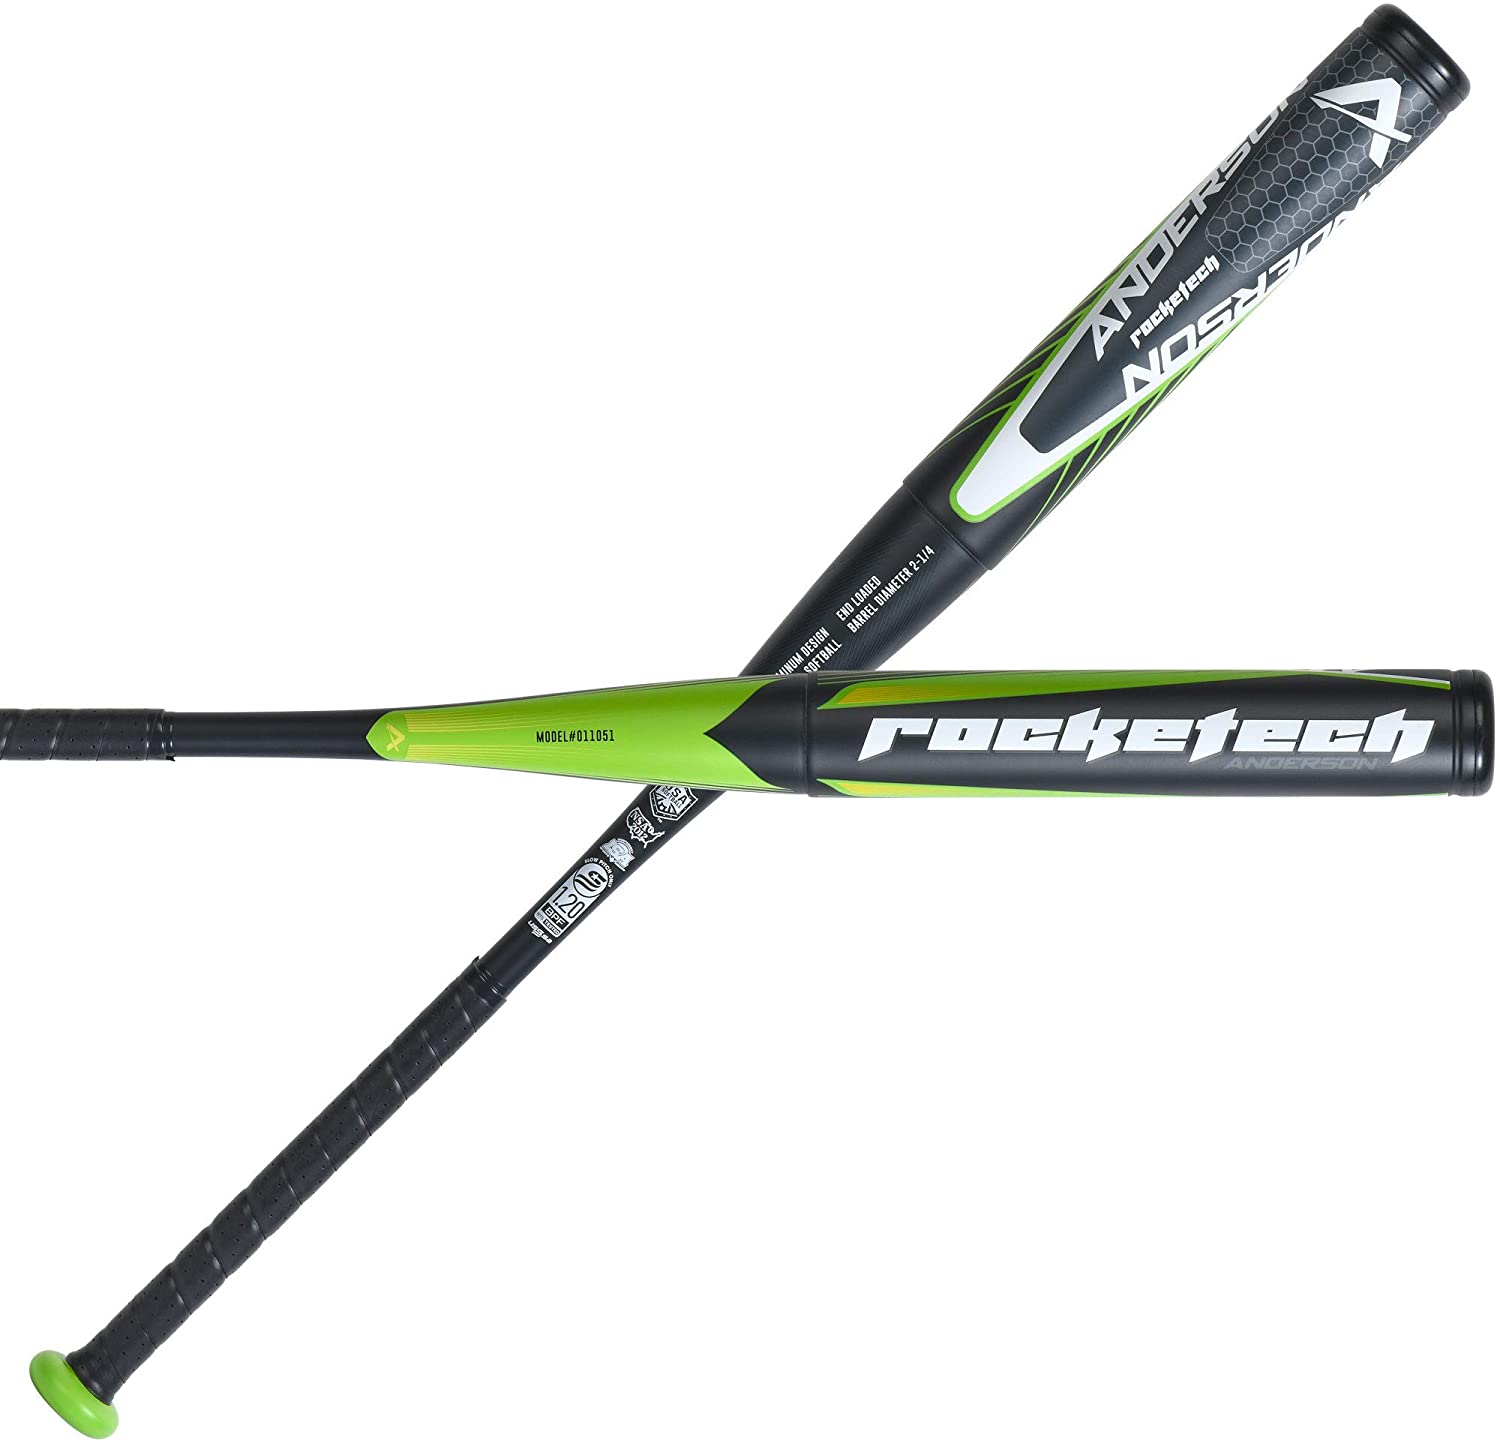 anderson-rocketech-2021-slowpitch-softball-bat-34-inch-27-oz 0110513-3427 Anderson  For over 15 years the Anderson Rocketech has been dominating the